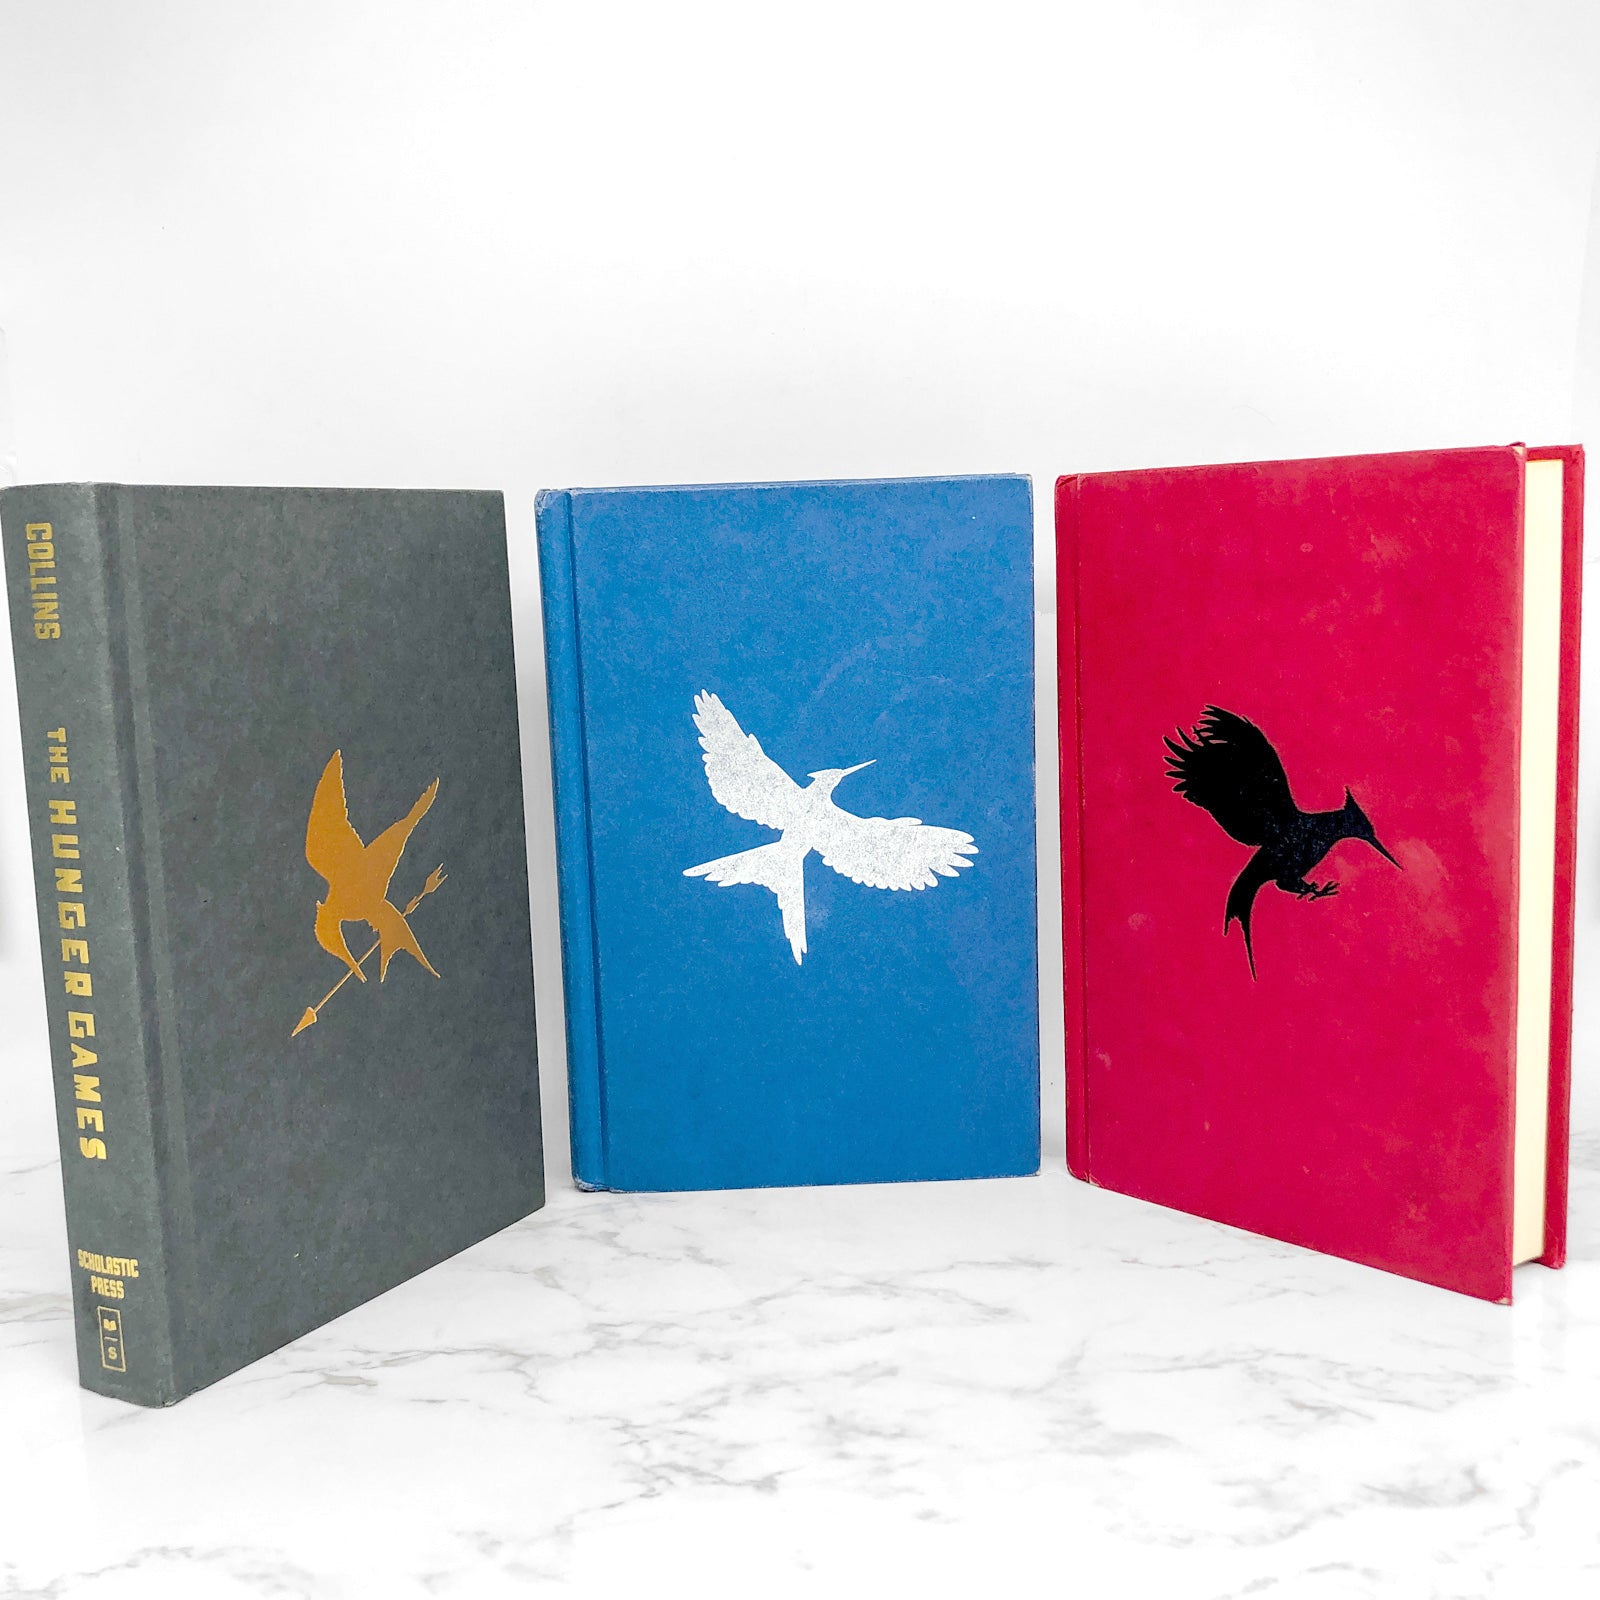 Hunger Games book set by Suzanne Collins, Hardcover